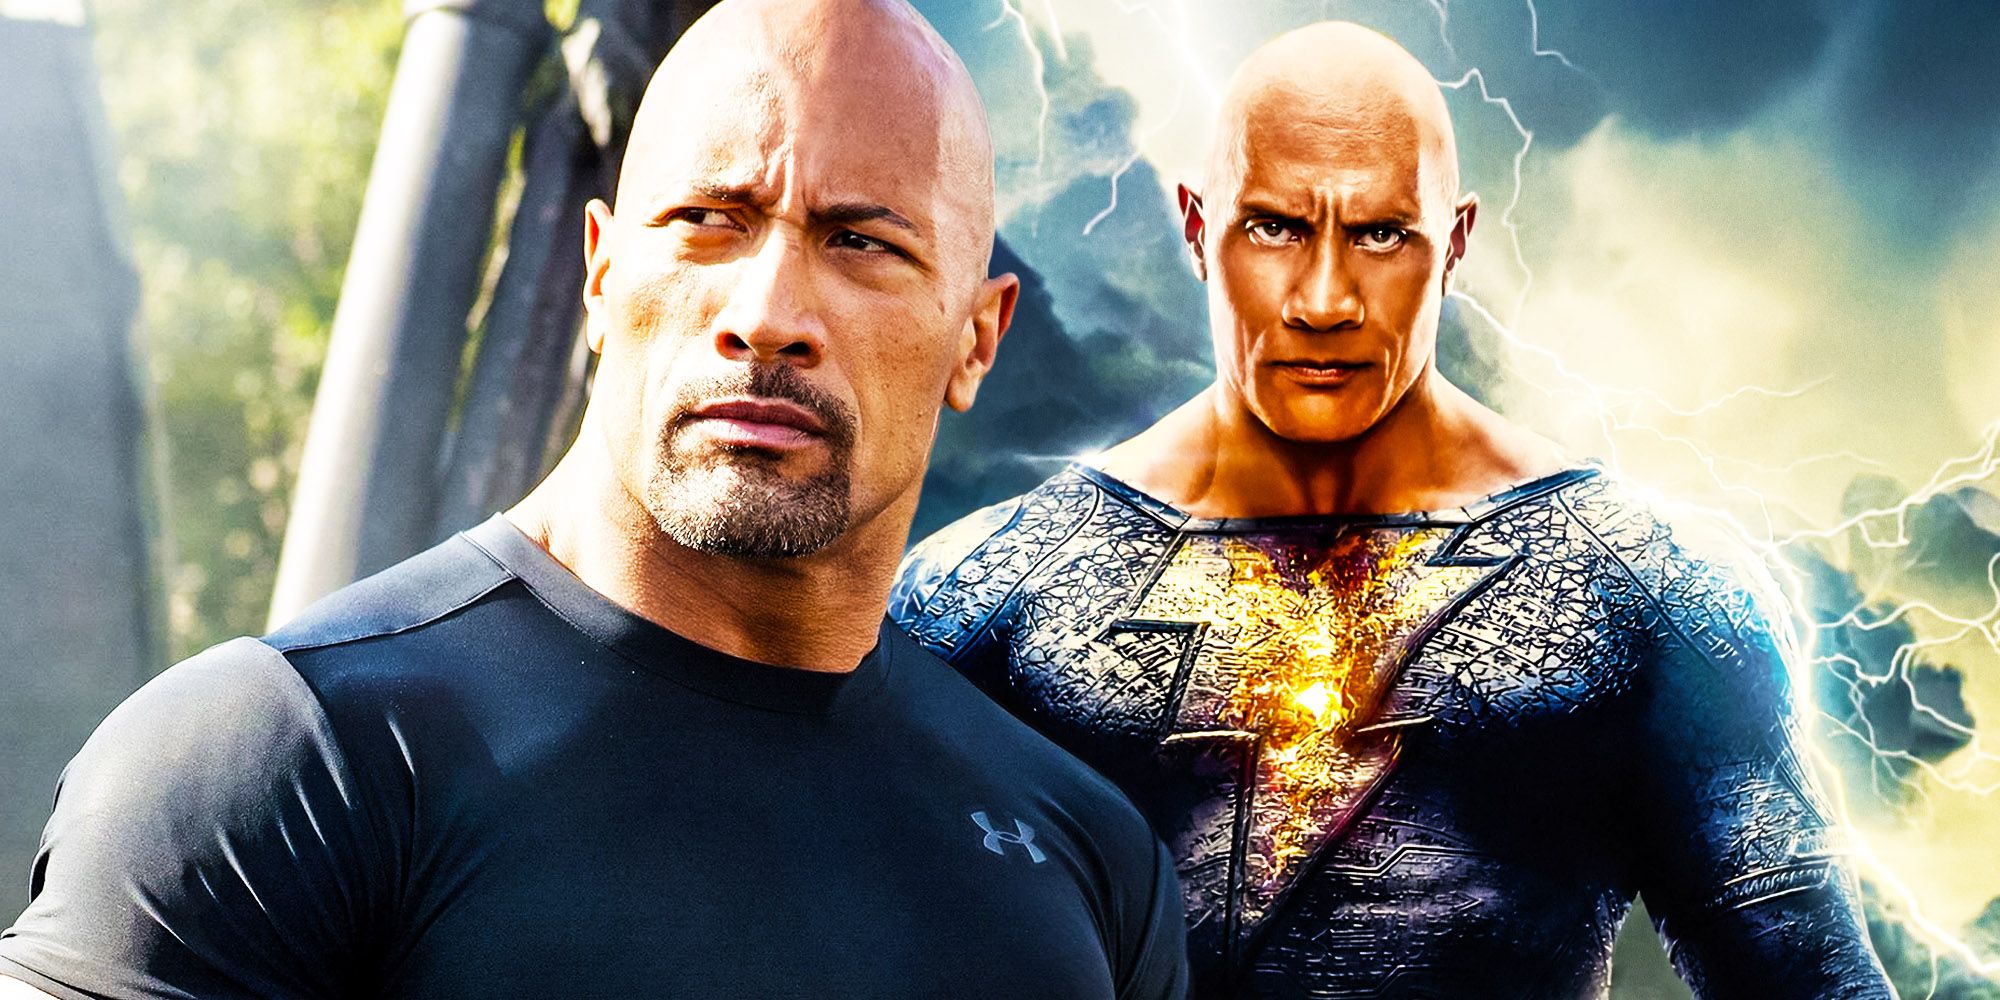 IGN on X: The Rock is confident that his Black Adam will fight Superman  one day in a DCEU film. He's not sure if that will be Henry Cavill or  someone else